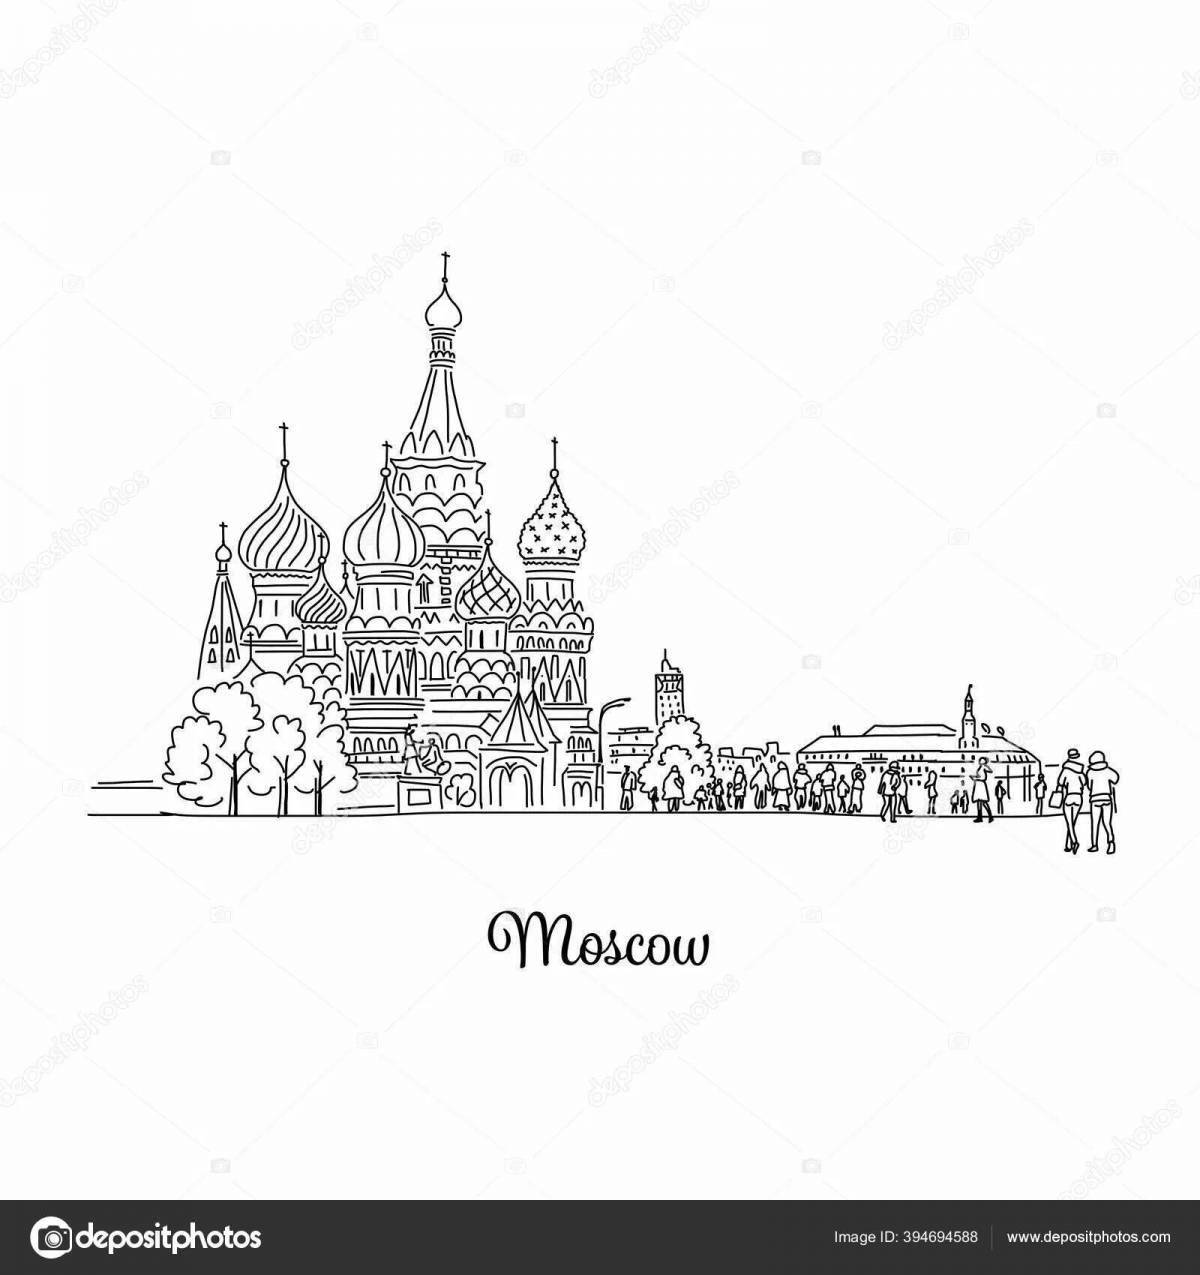 Outstanding coloring book of moscow, capital of russia for kids